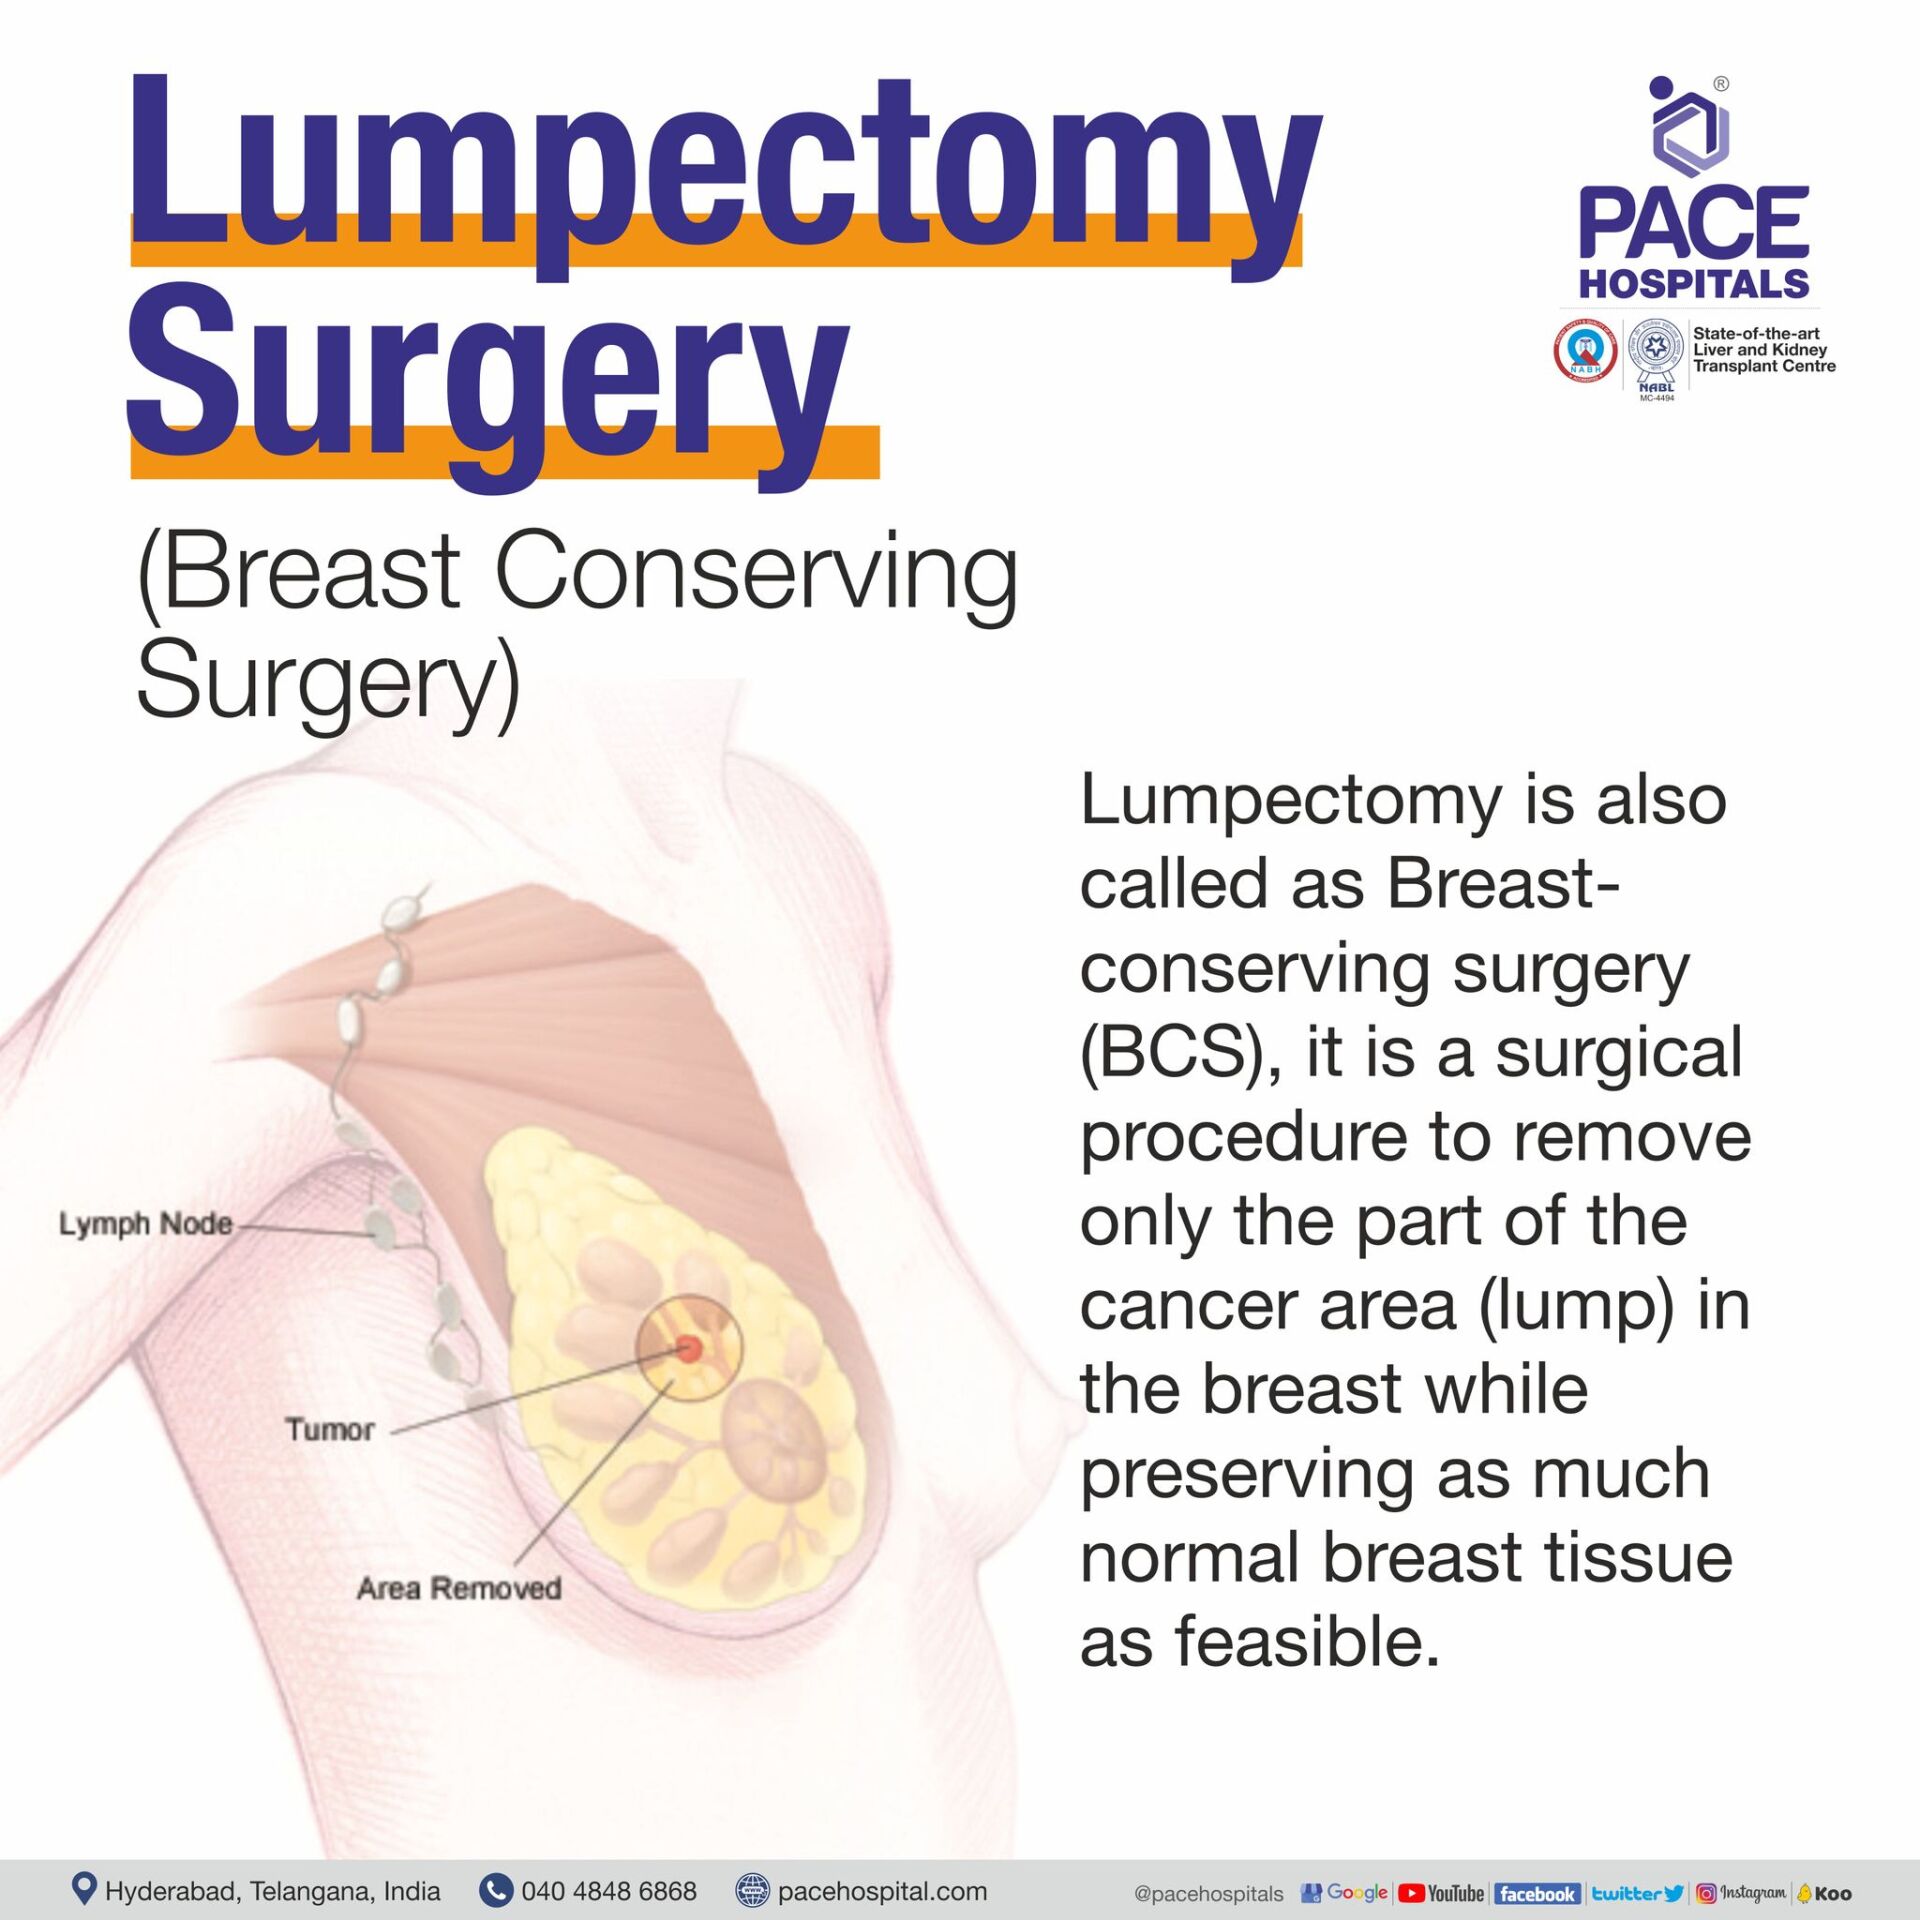 Lumpectomy meaning | Lumpectomy surgery | Breast lumpectomy | Breast conserving surgery definition | Breast conserving surgery procedure